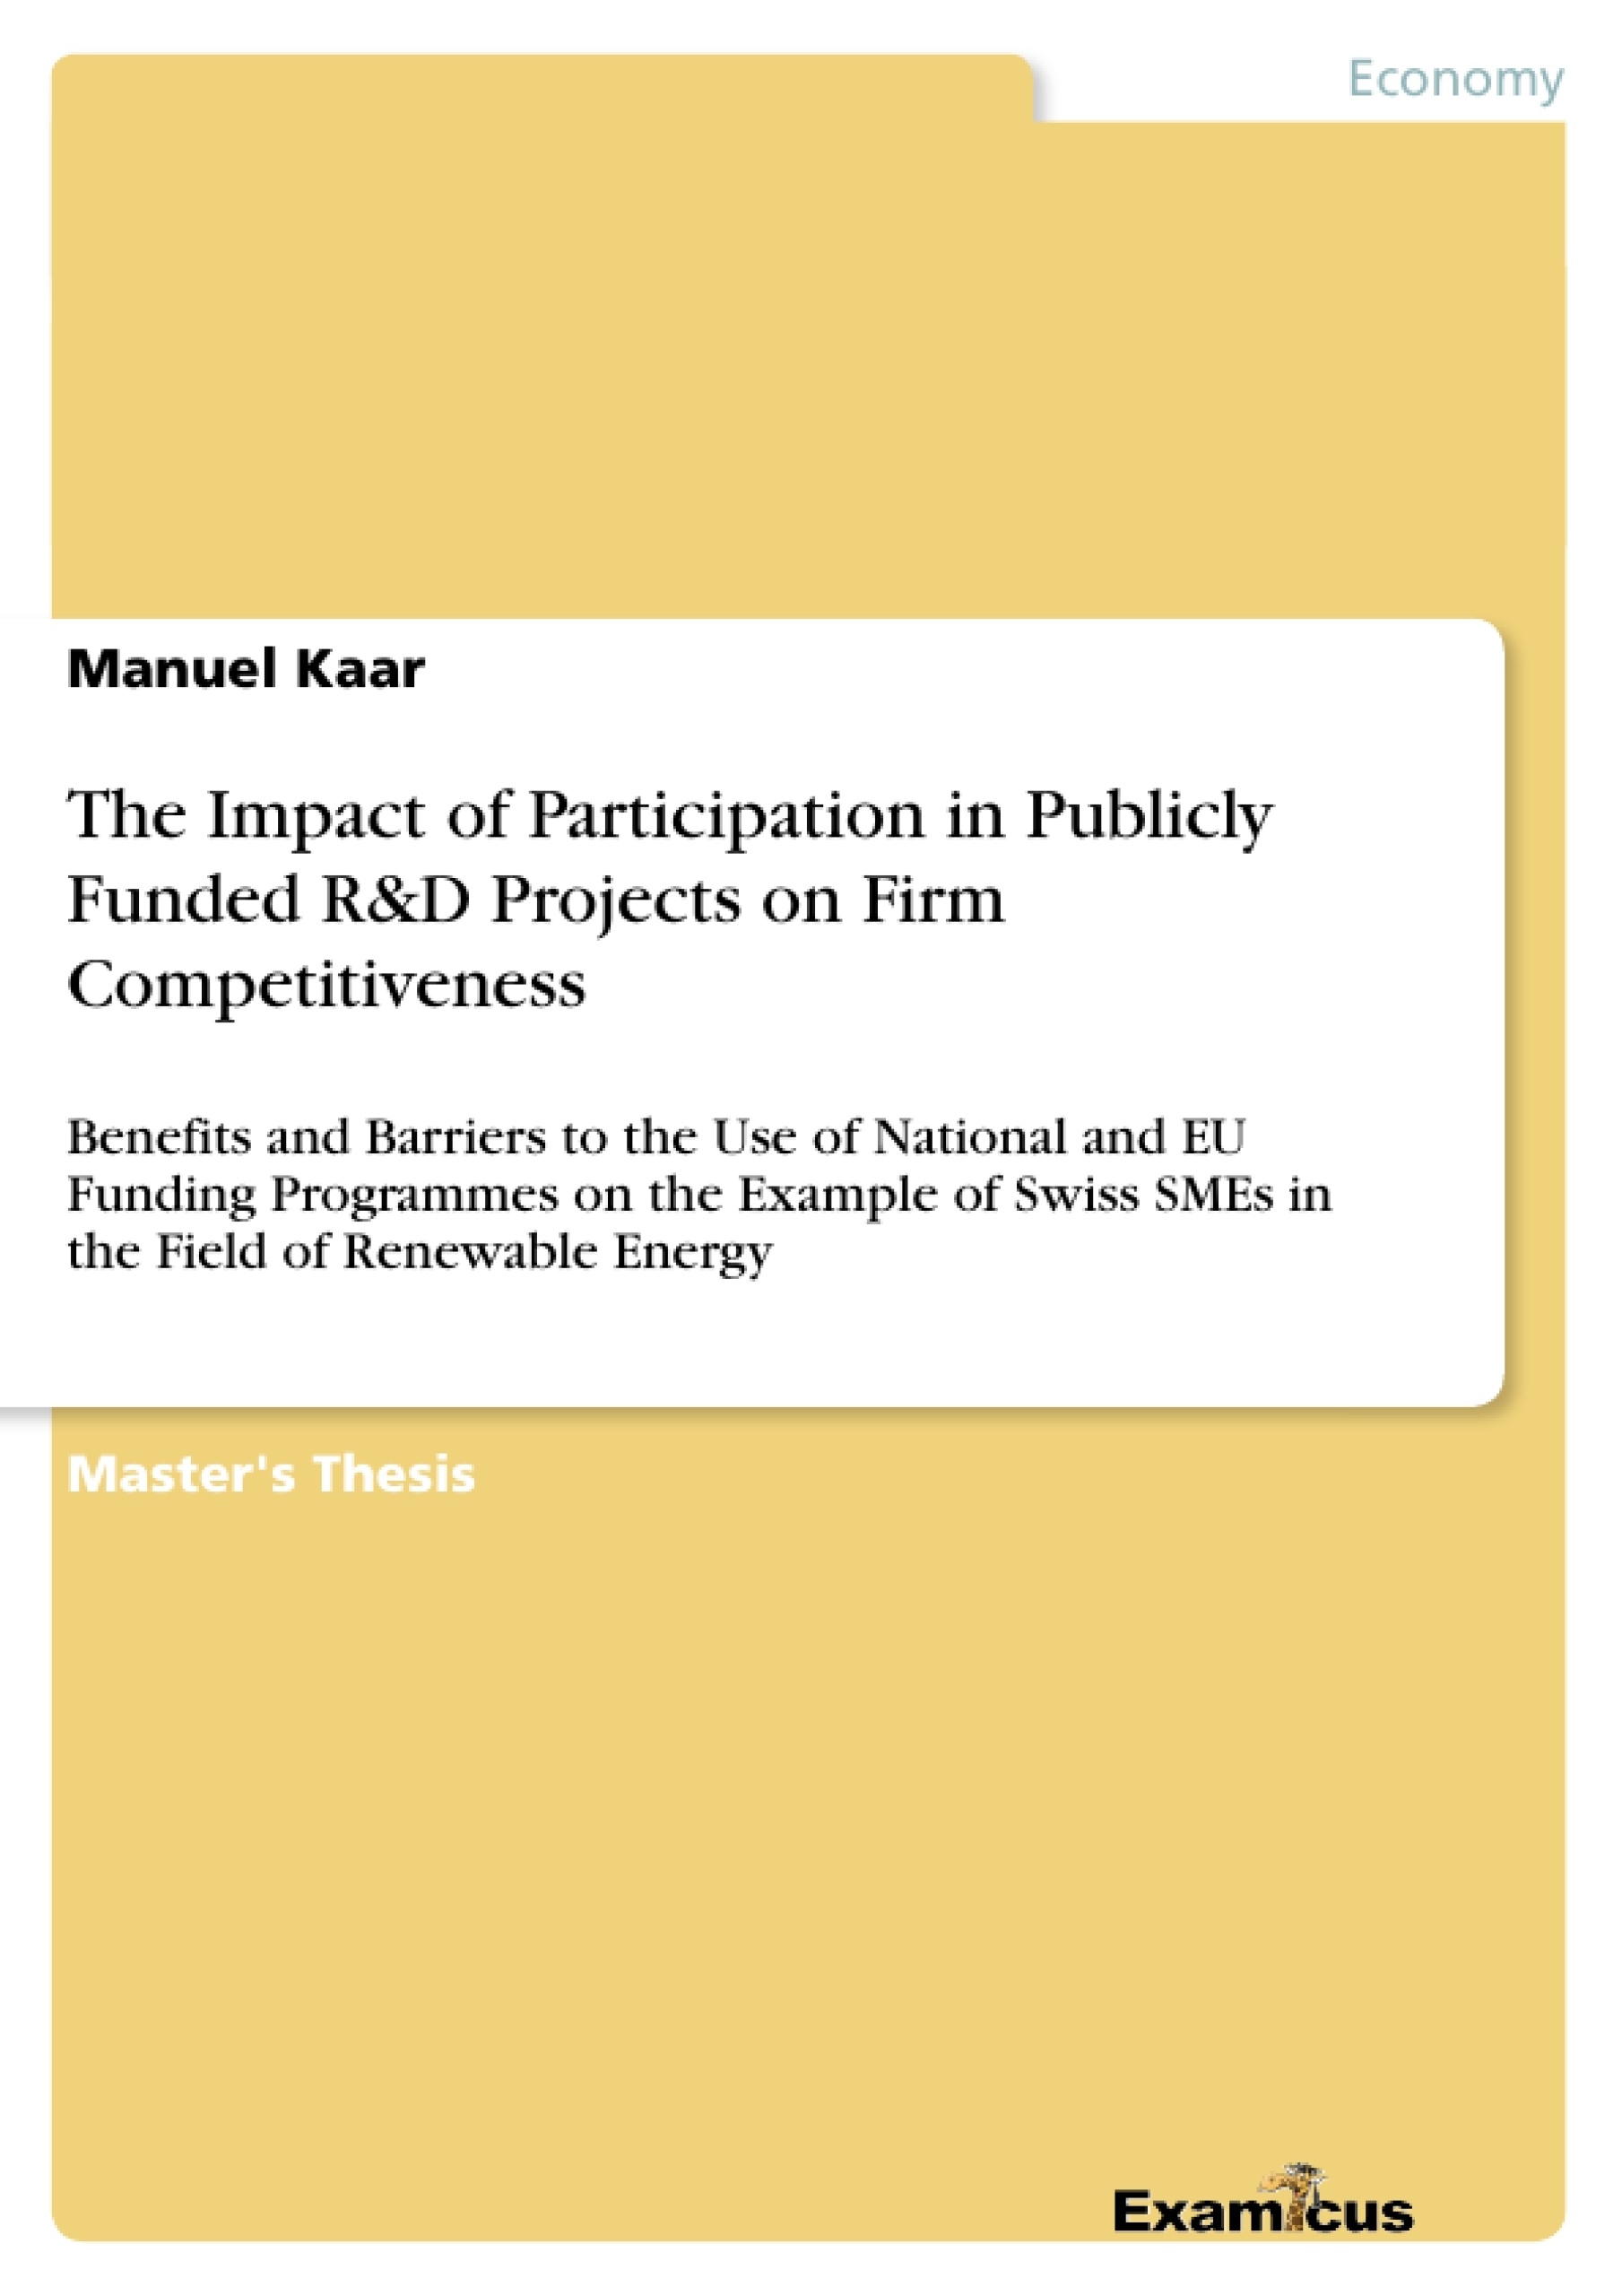 Title: The Impact of Participation in Publicly Funded R&D Projects on Firm Competitiveness